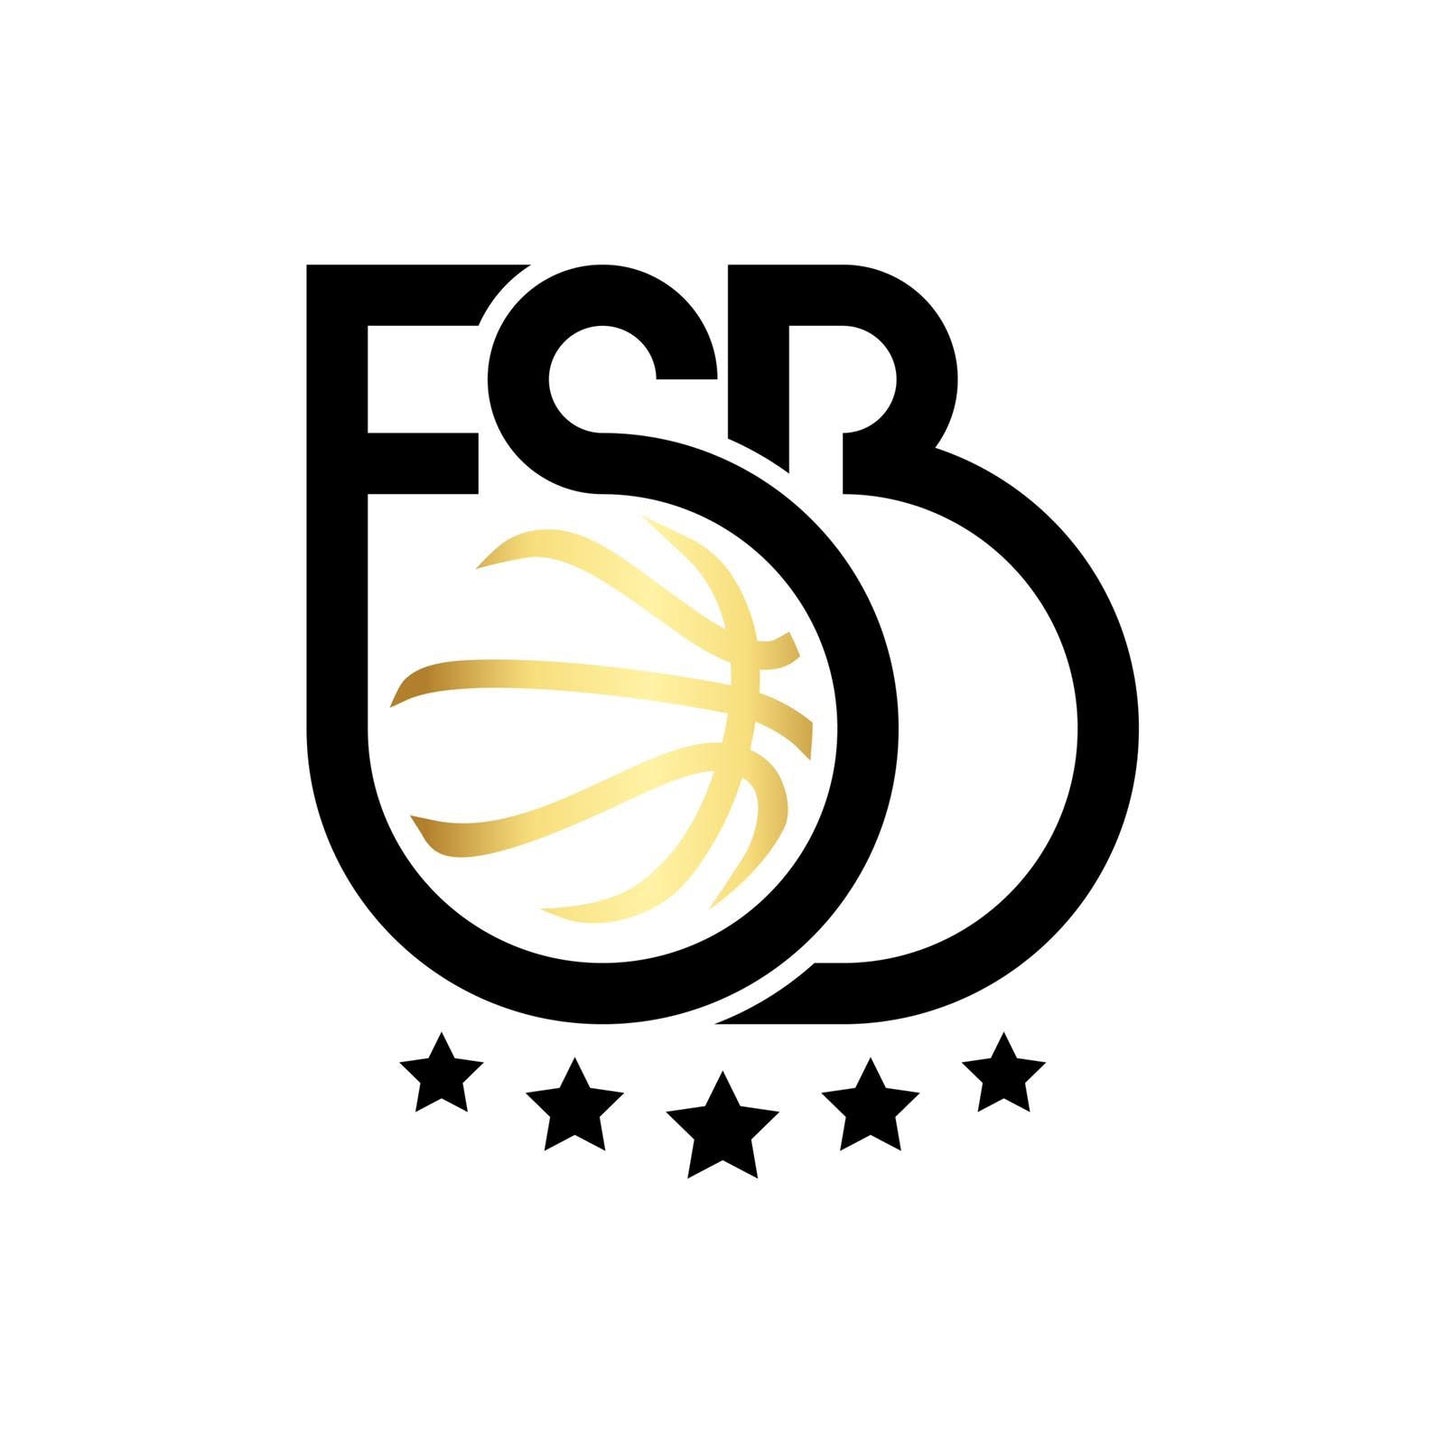 FSB BOYS AGE 13-15 PLAYER PLACEMENT SESSION